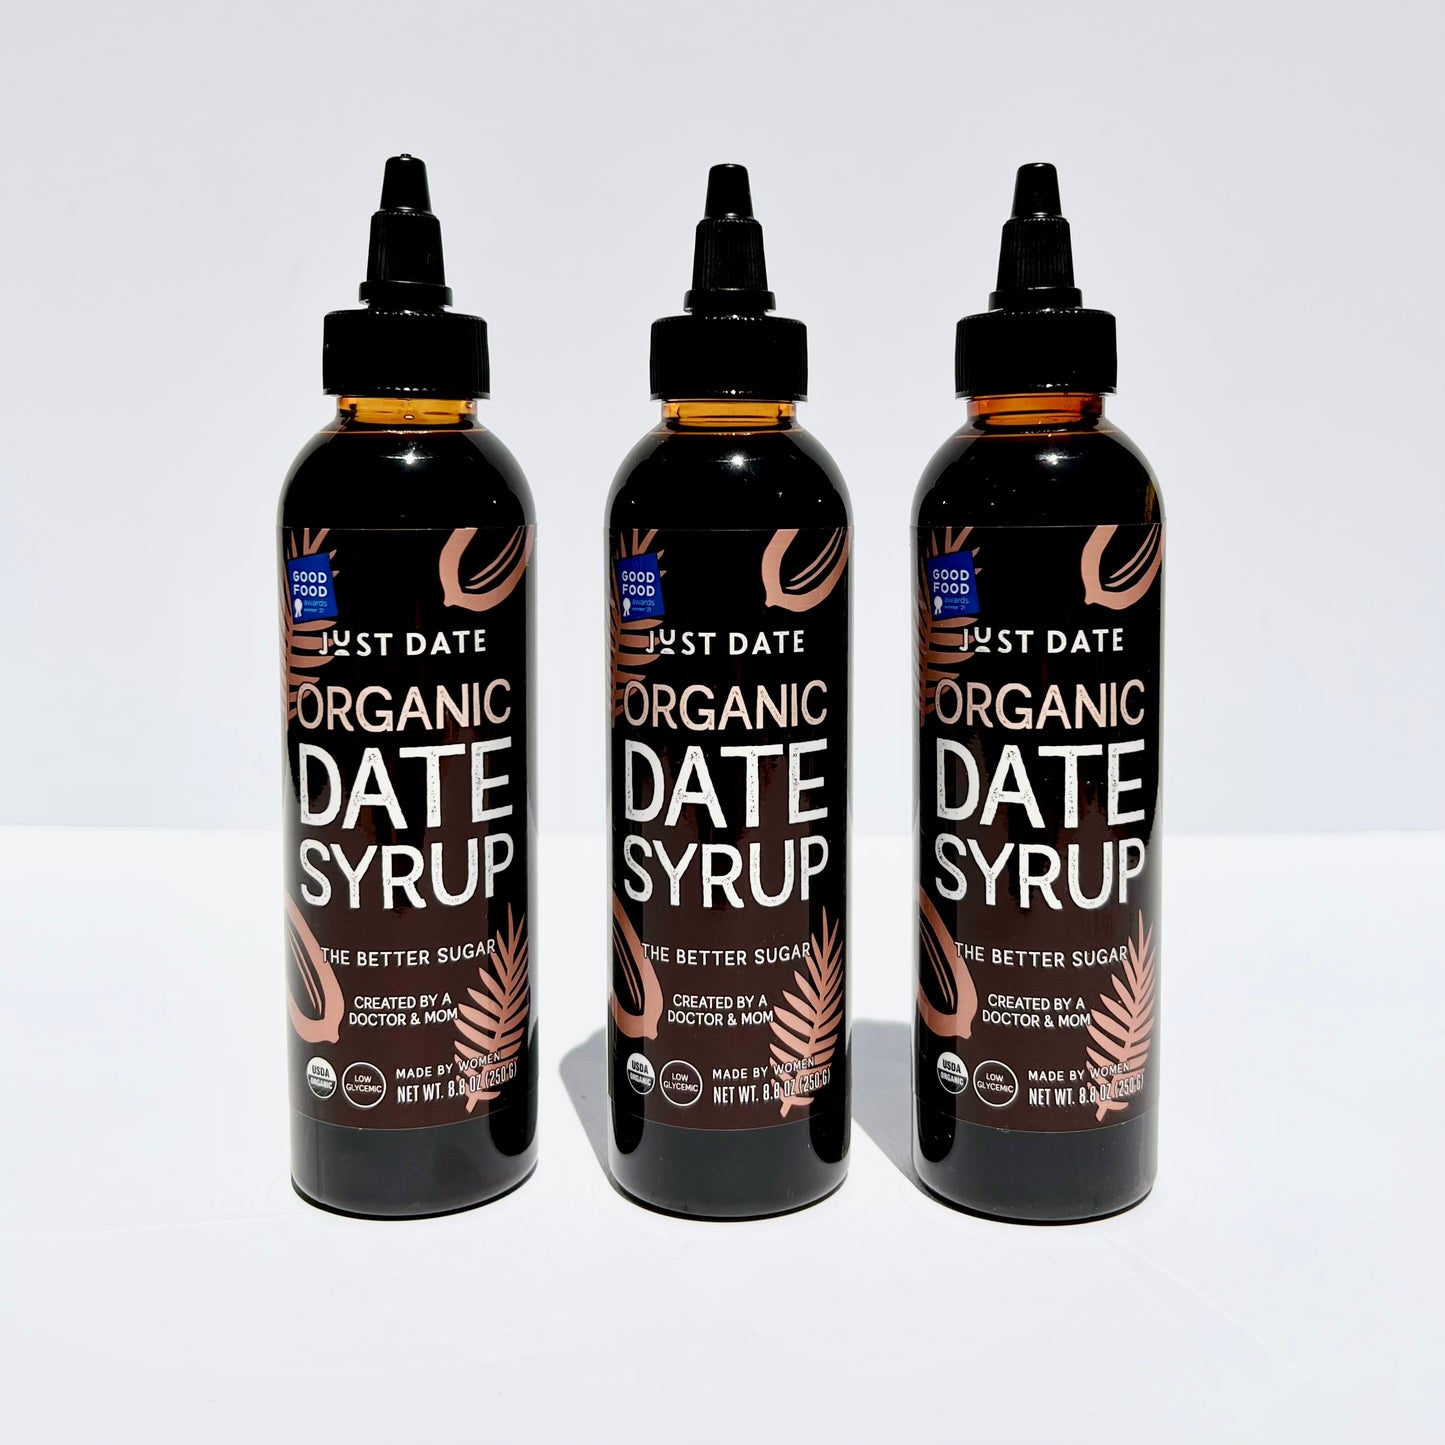 Just Date Syrup